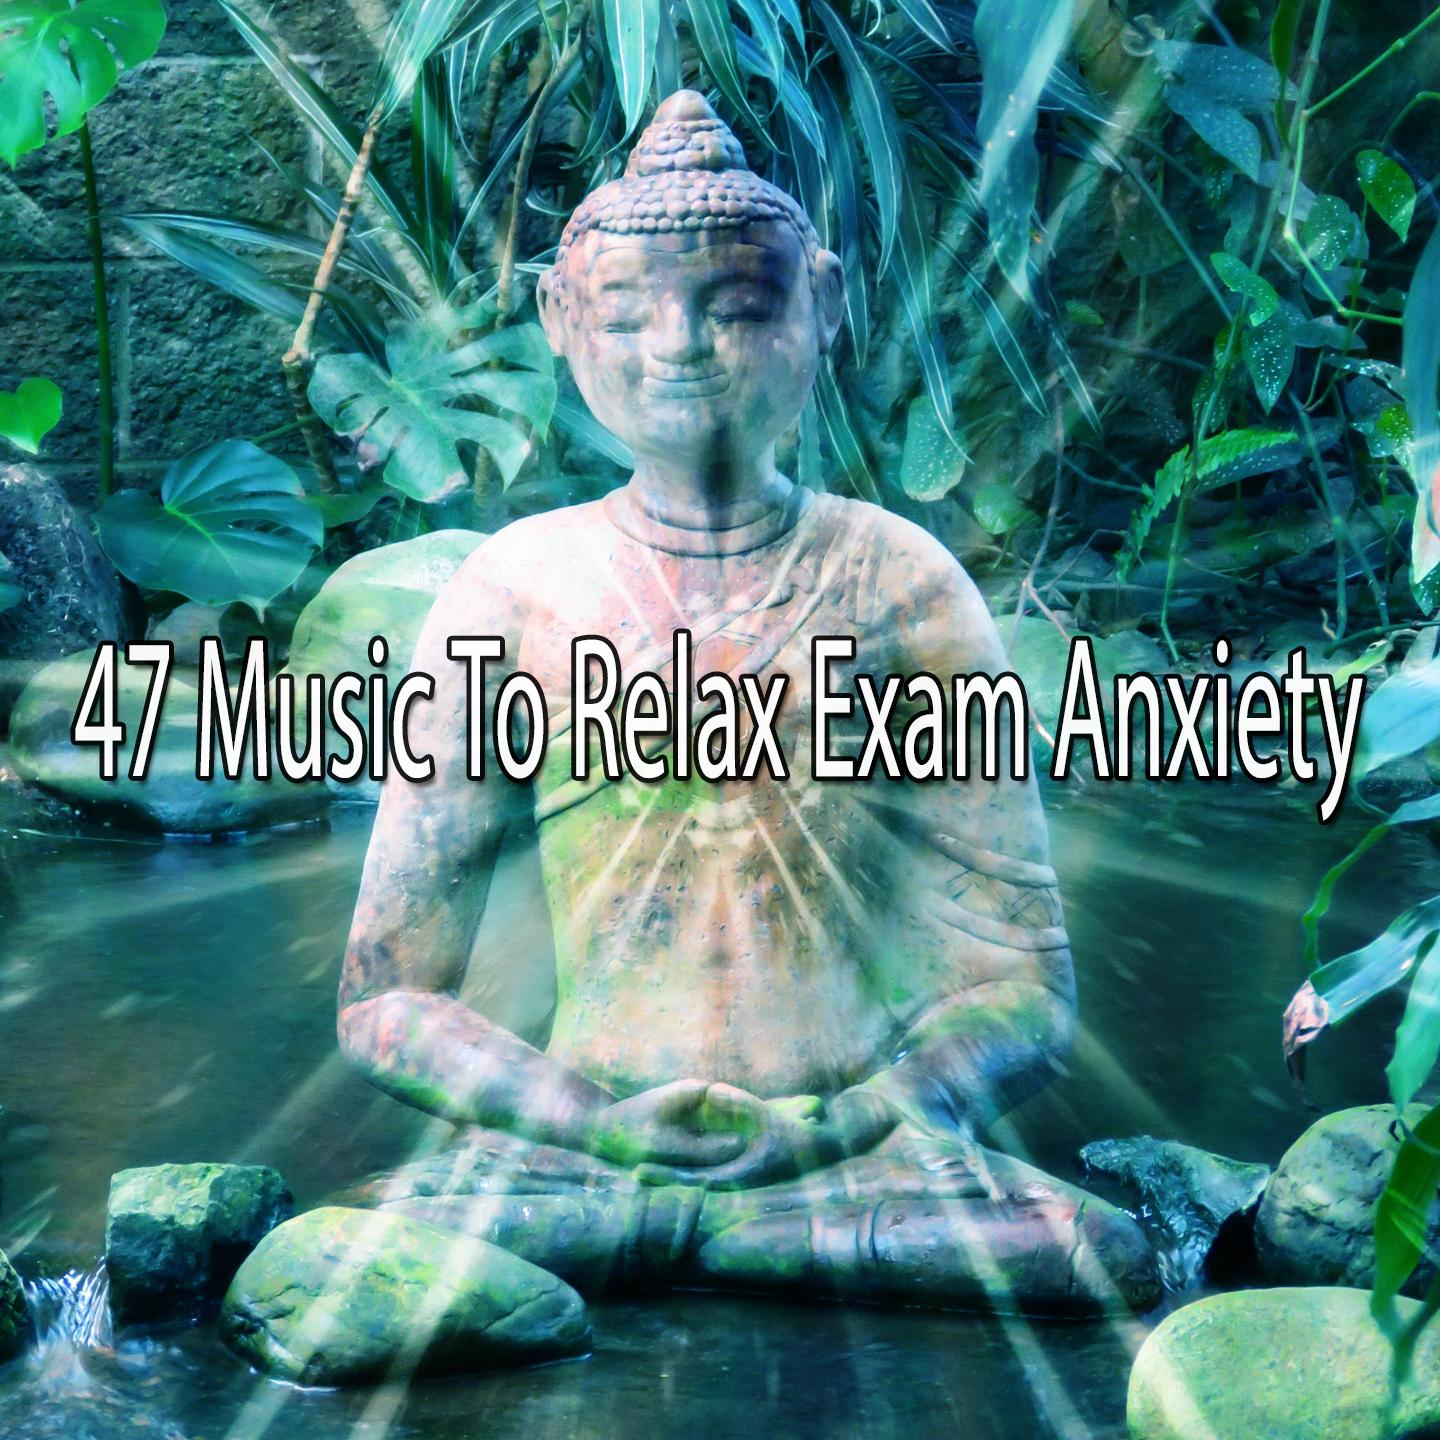 47 Music to Relax Exam Anxiety